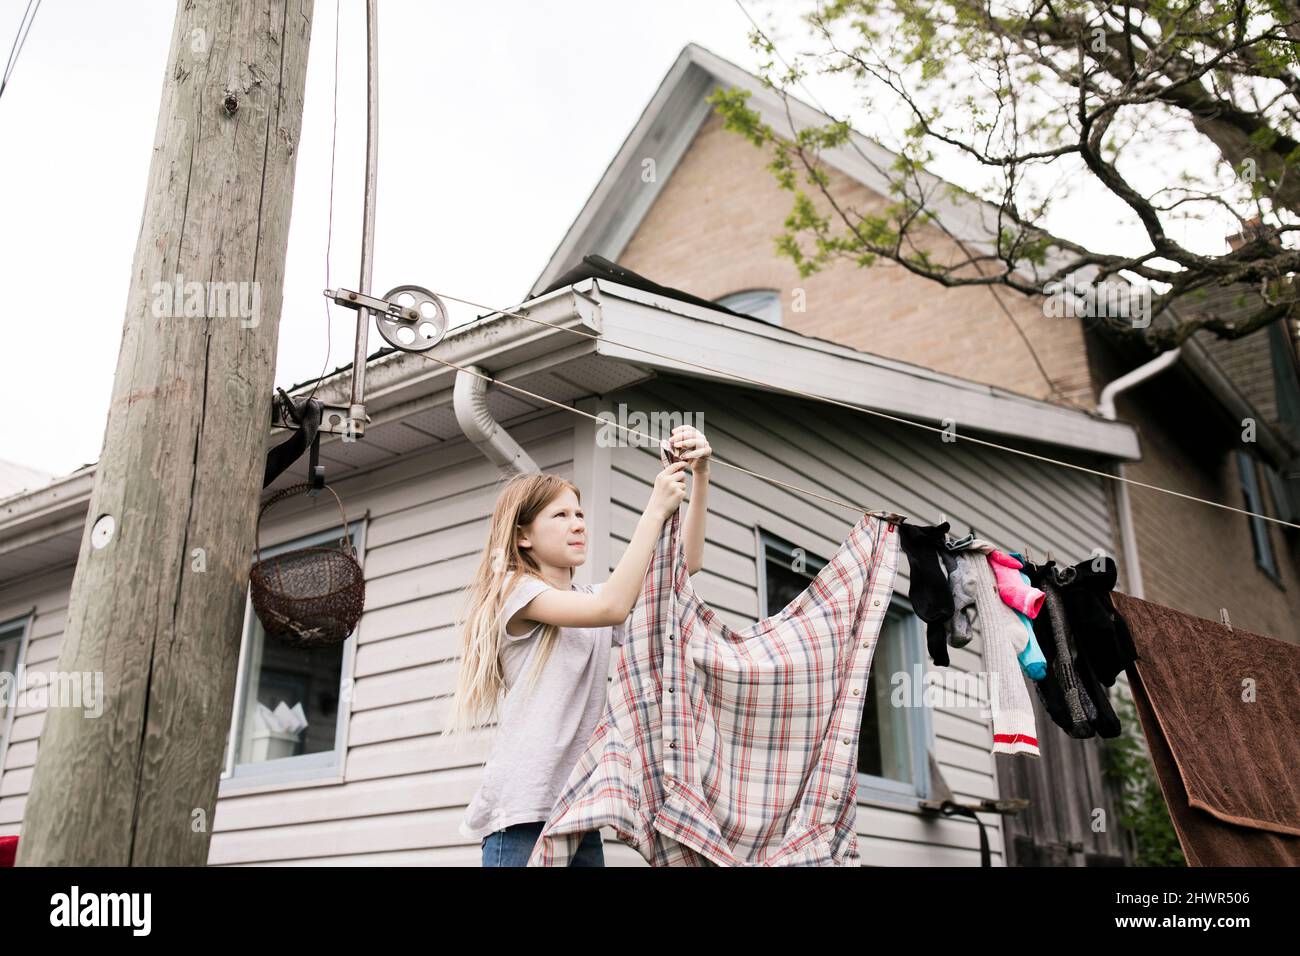 Girl hanging clothes on rope outside house Stock Photo